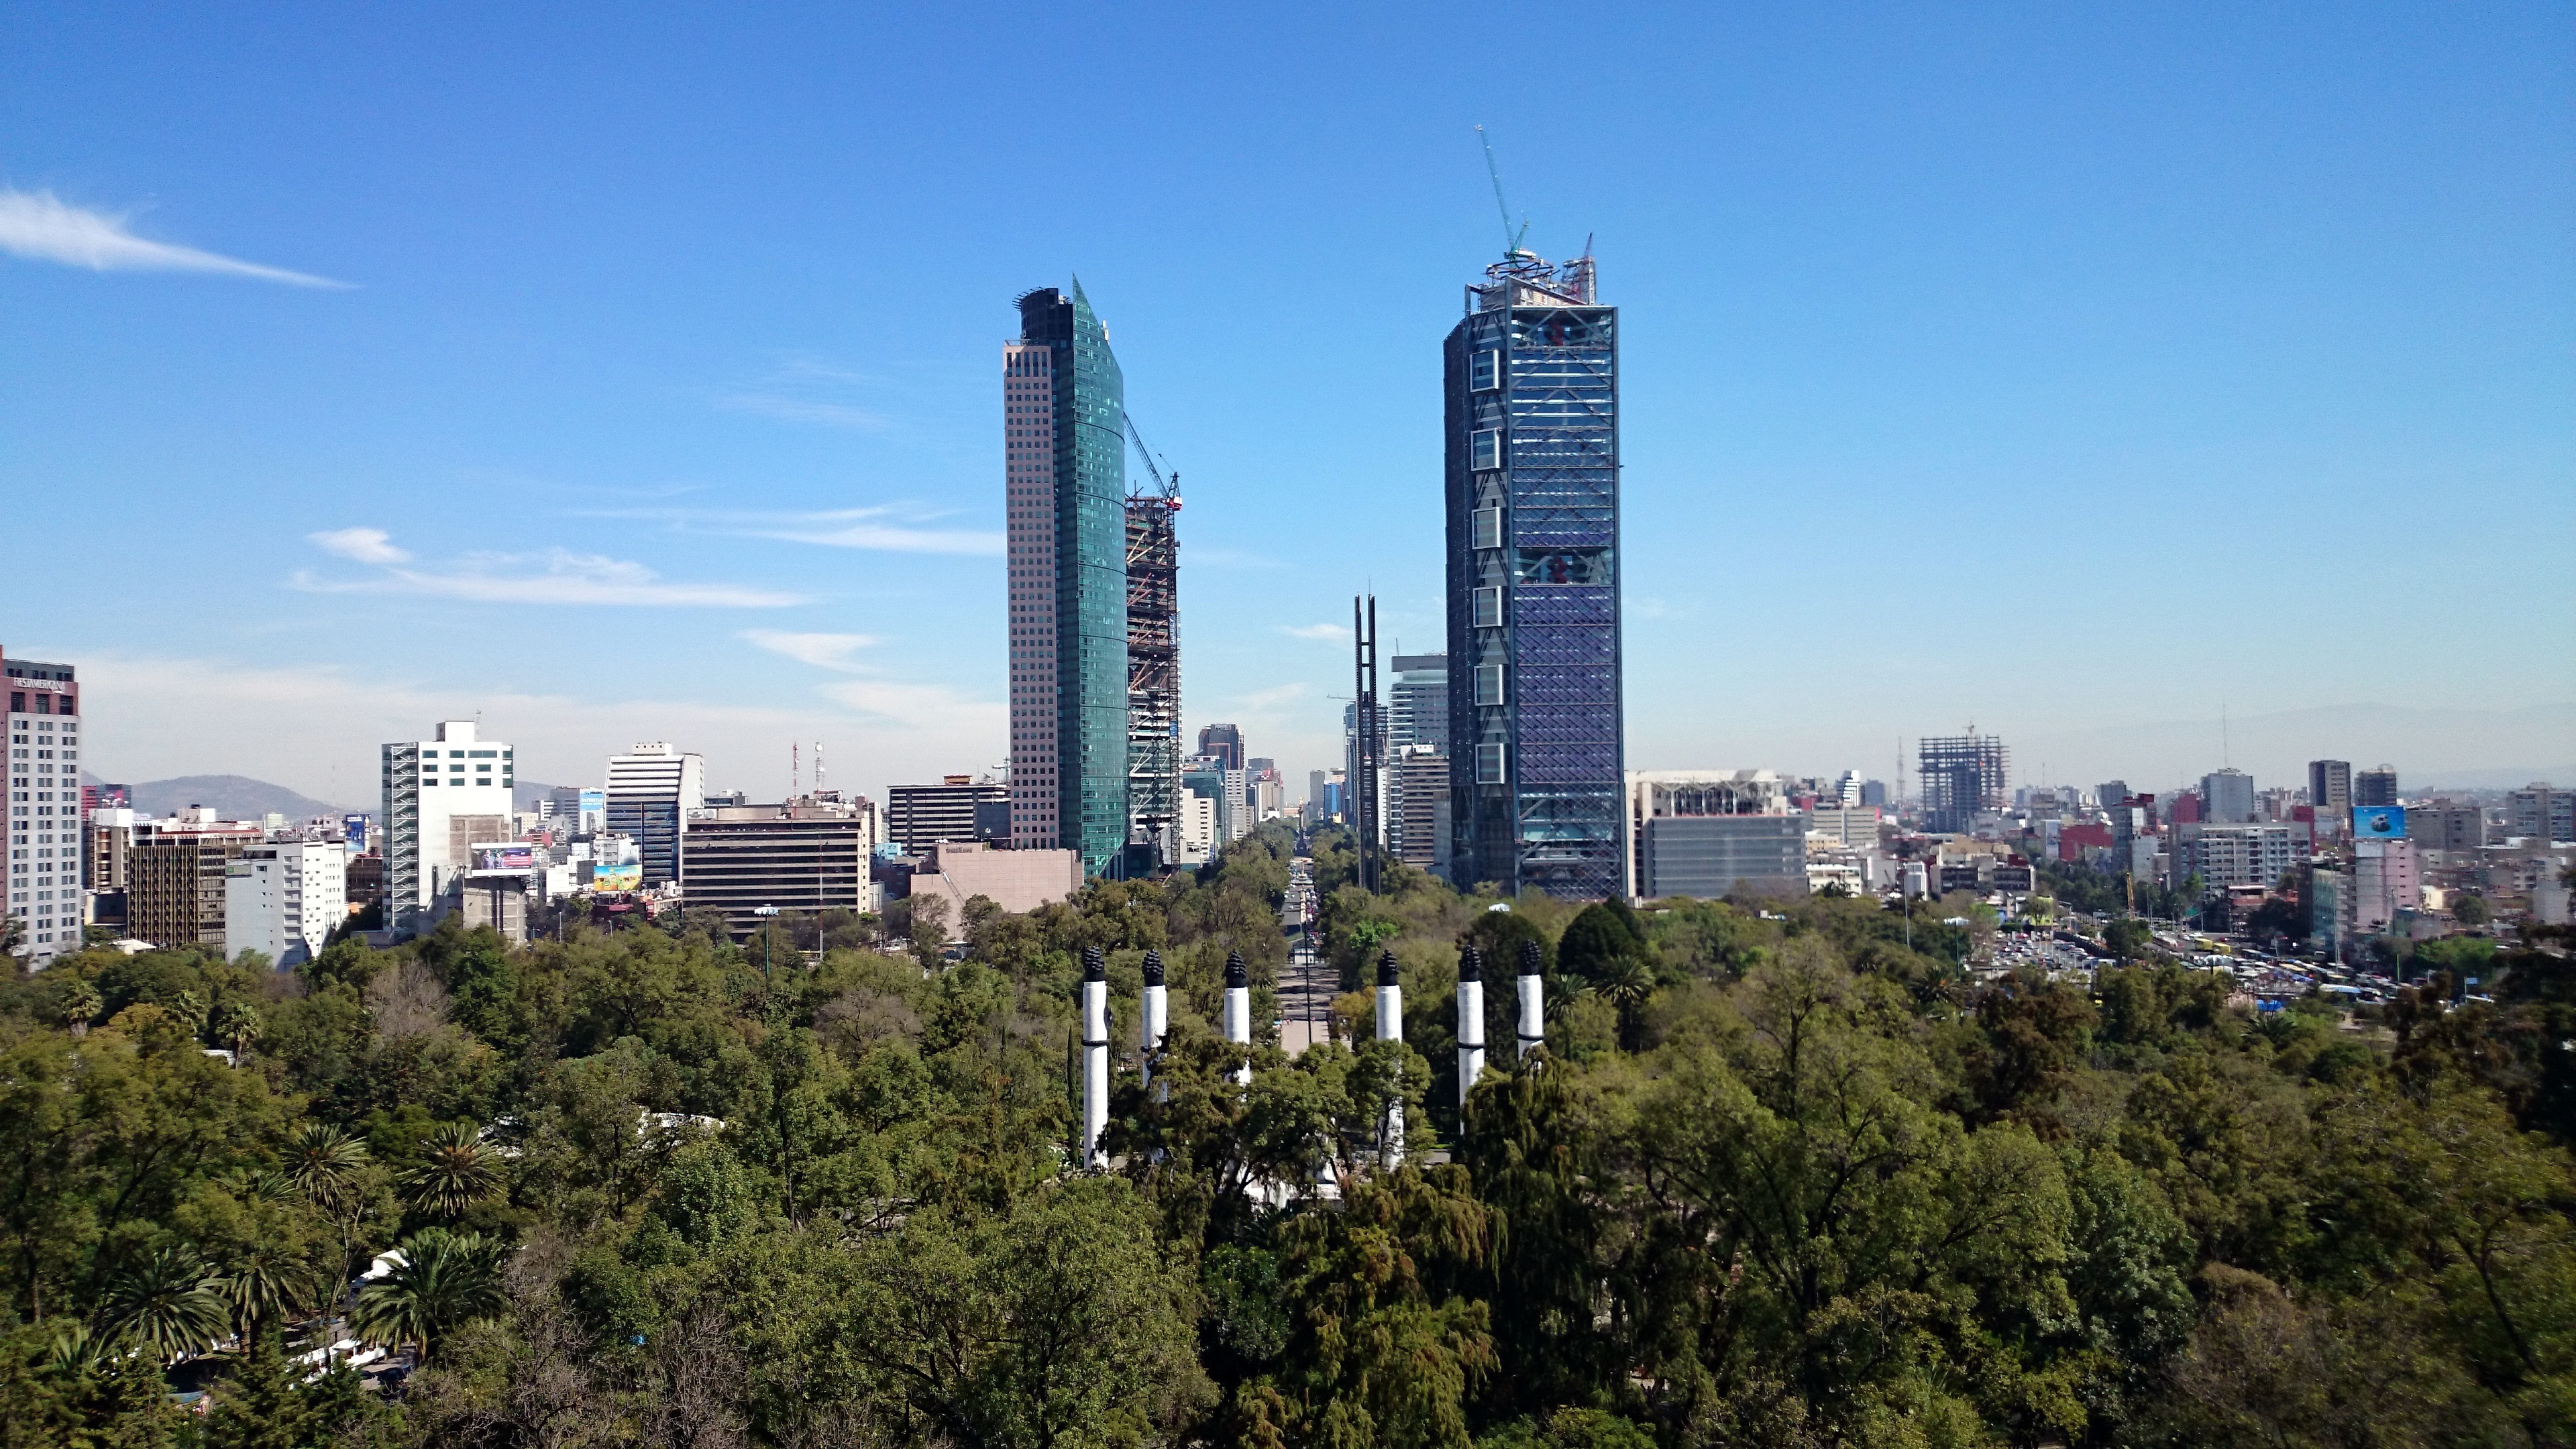 Quality Mexico City Wallpaper Cities